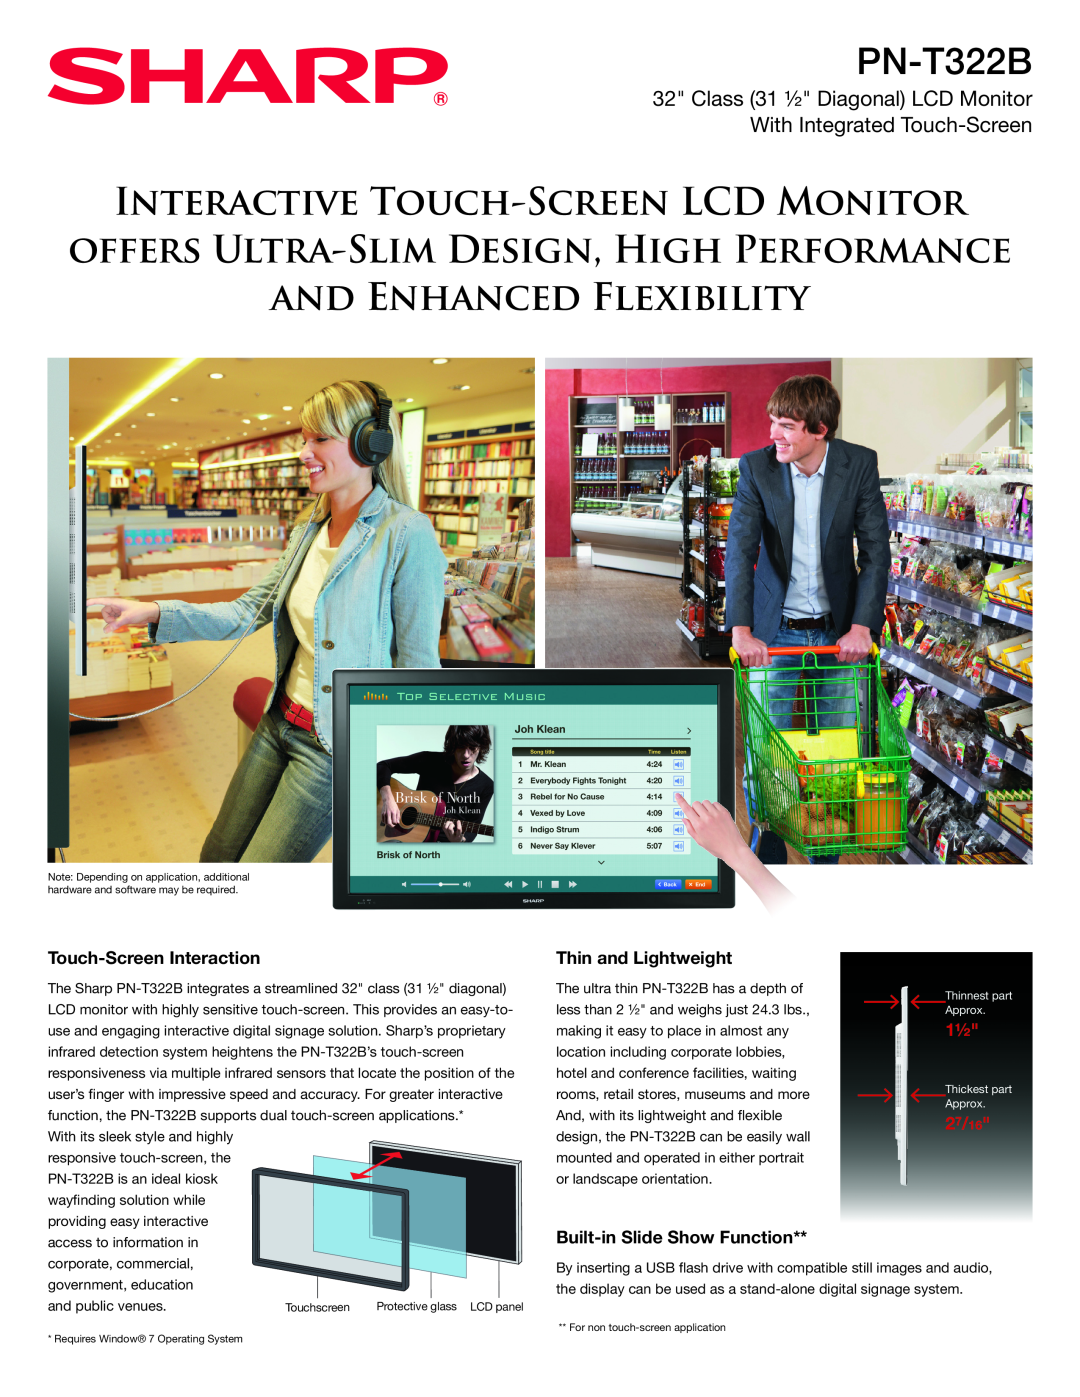 Sharp PN-T322B manual Touch-Screen Interaction, Thin and Lightweight, Built-in Slide Show Function, 27/16 